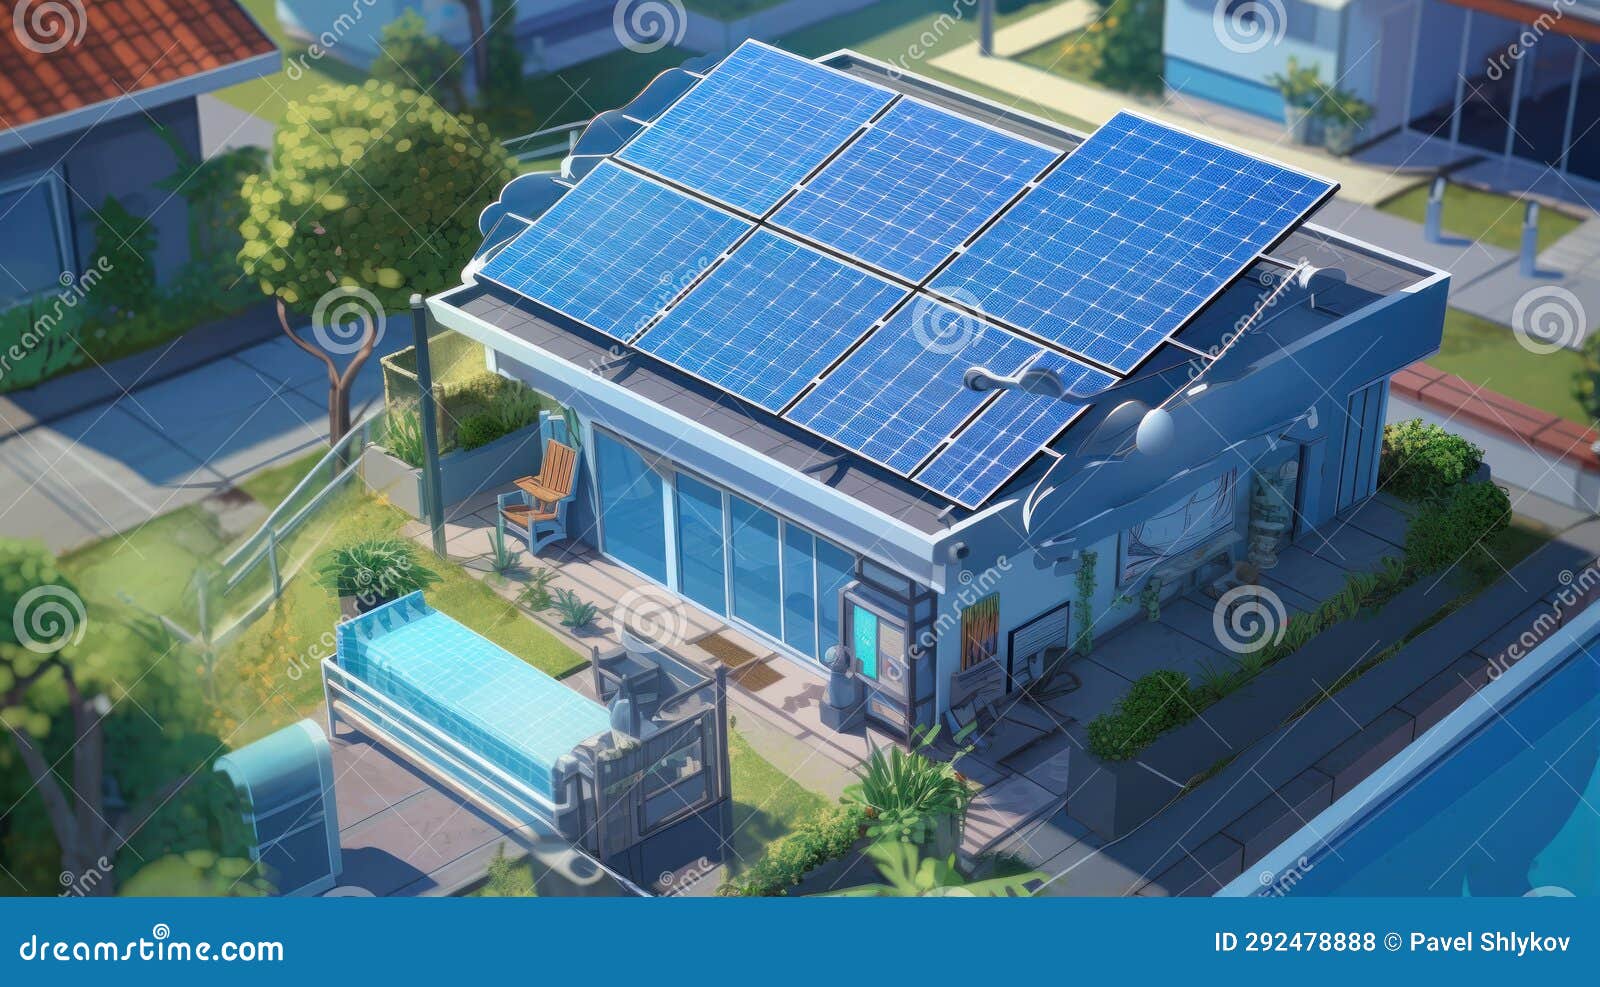 solar photovoltaic panels on house roof